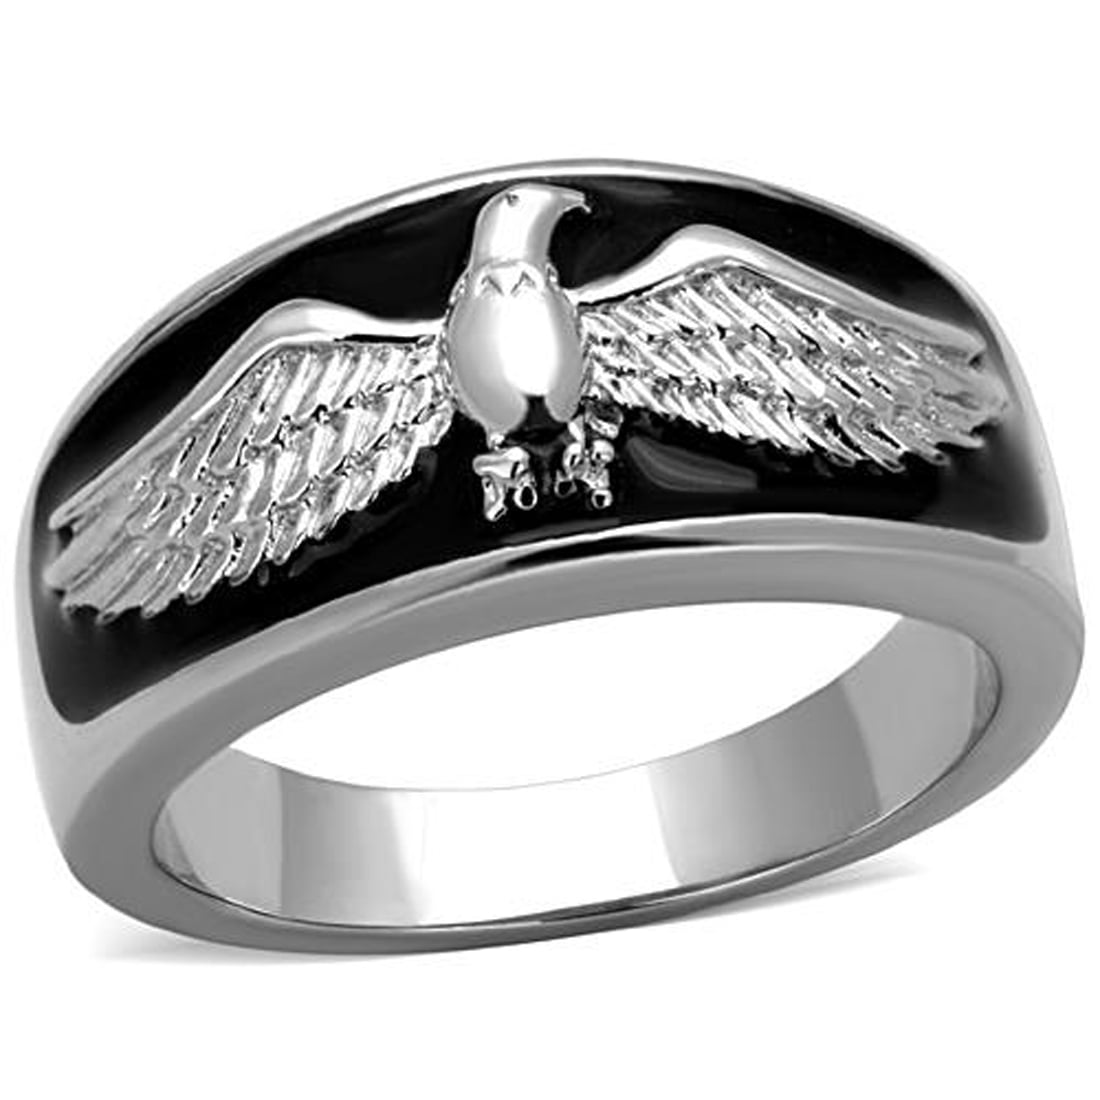 BIG WING EAGLE SILVER PLATED MOTORCYCLE BIKER RING